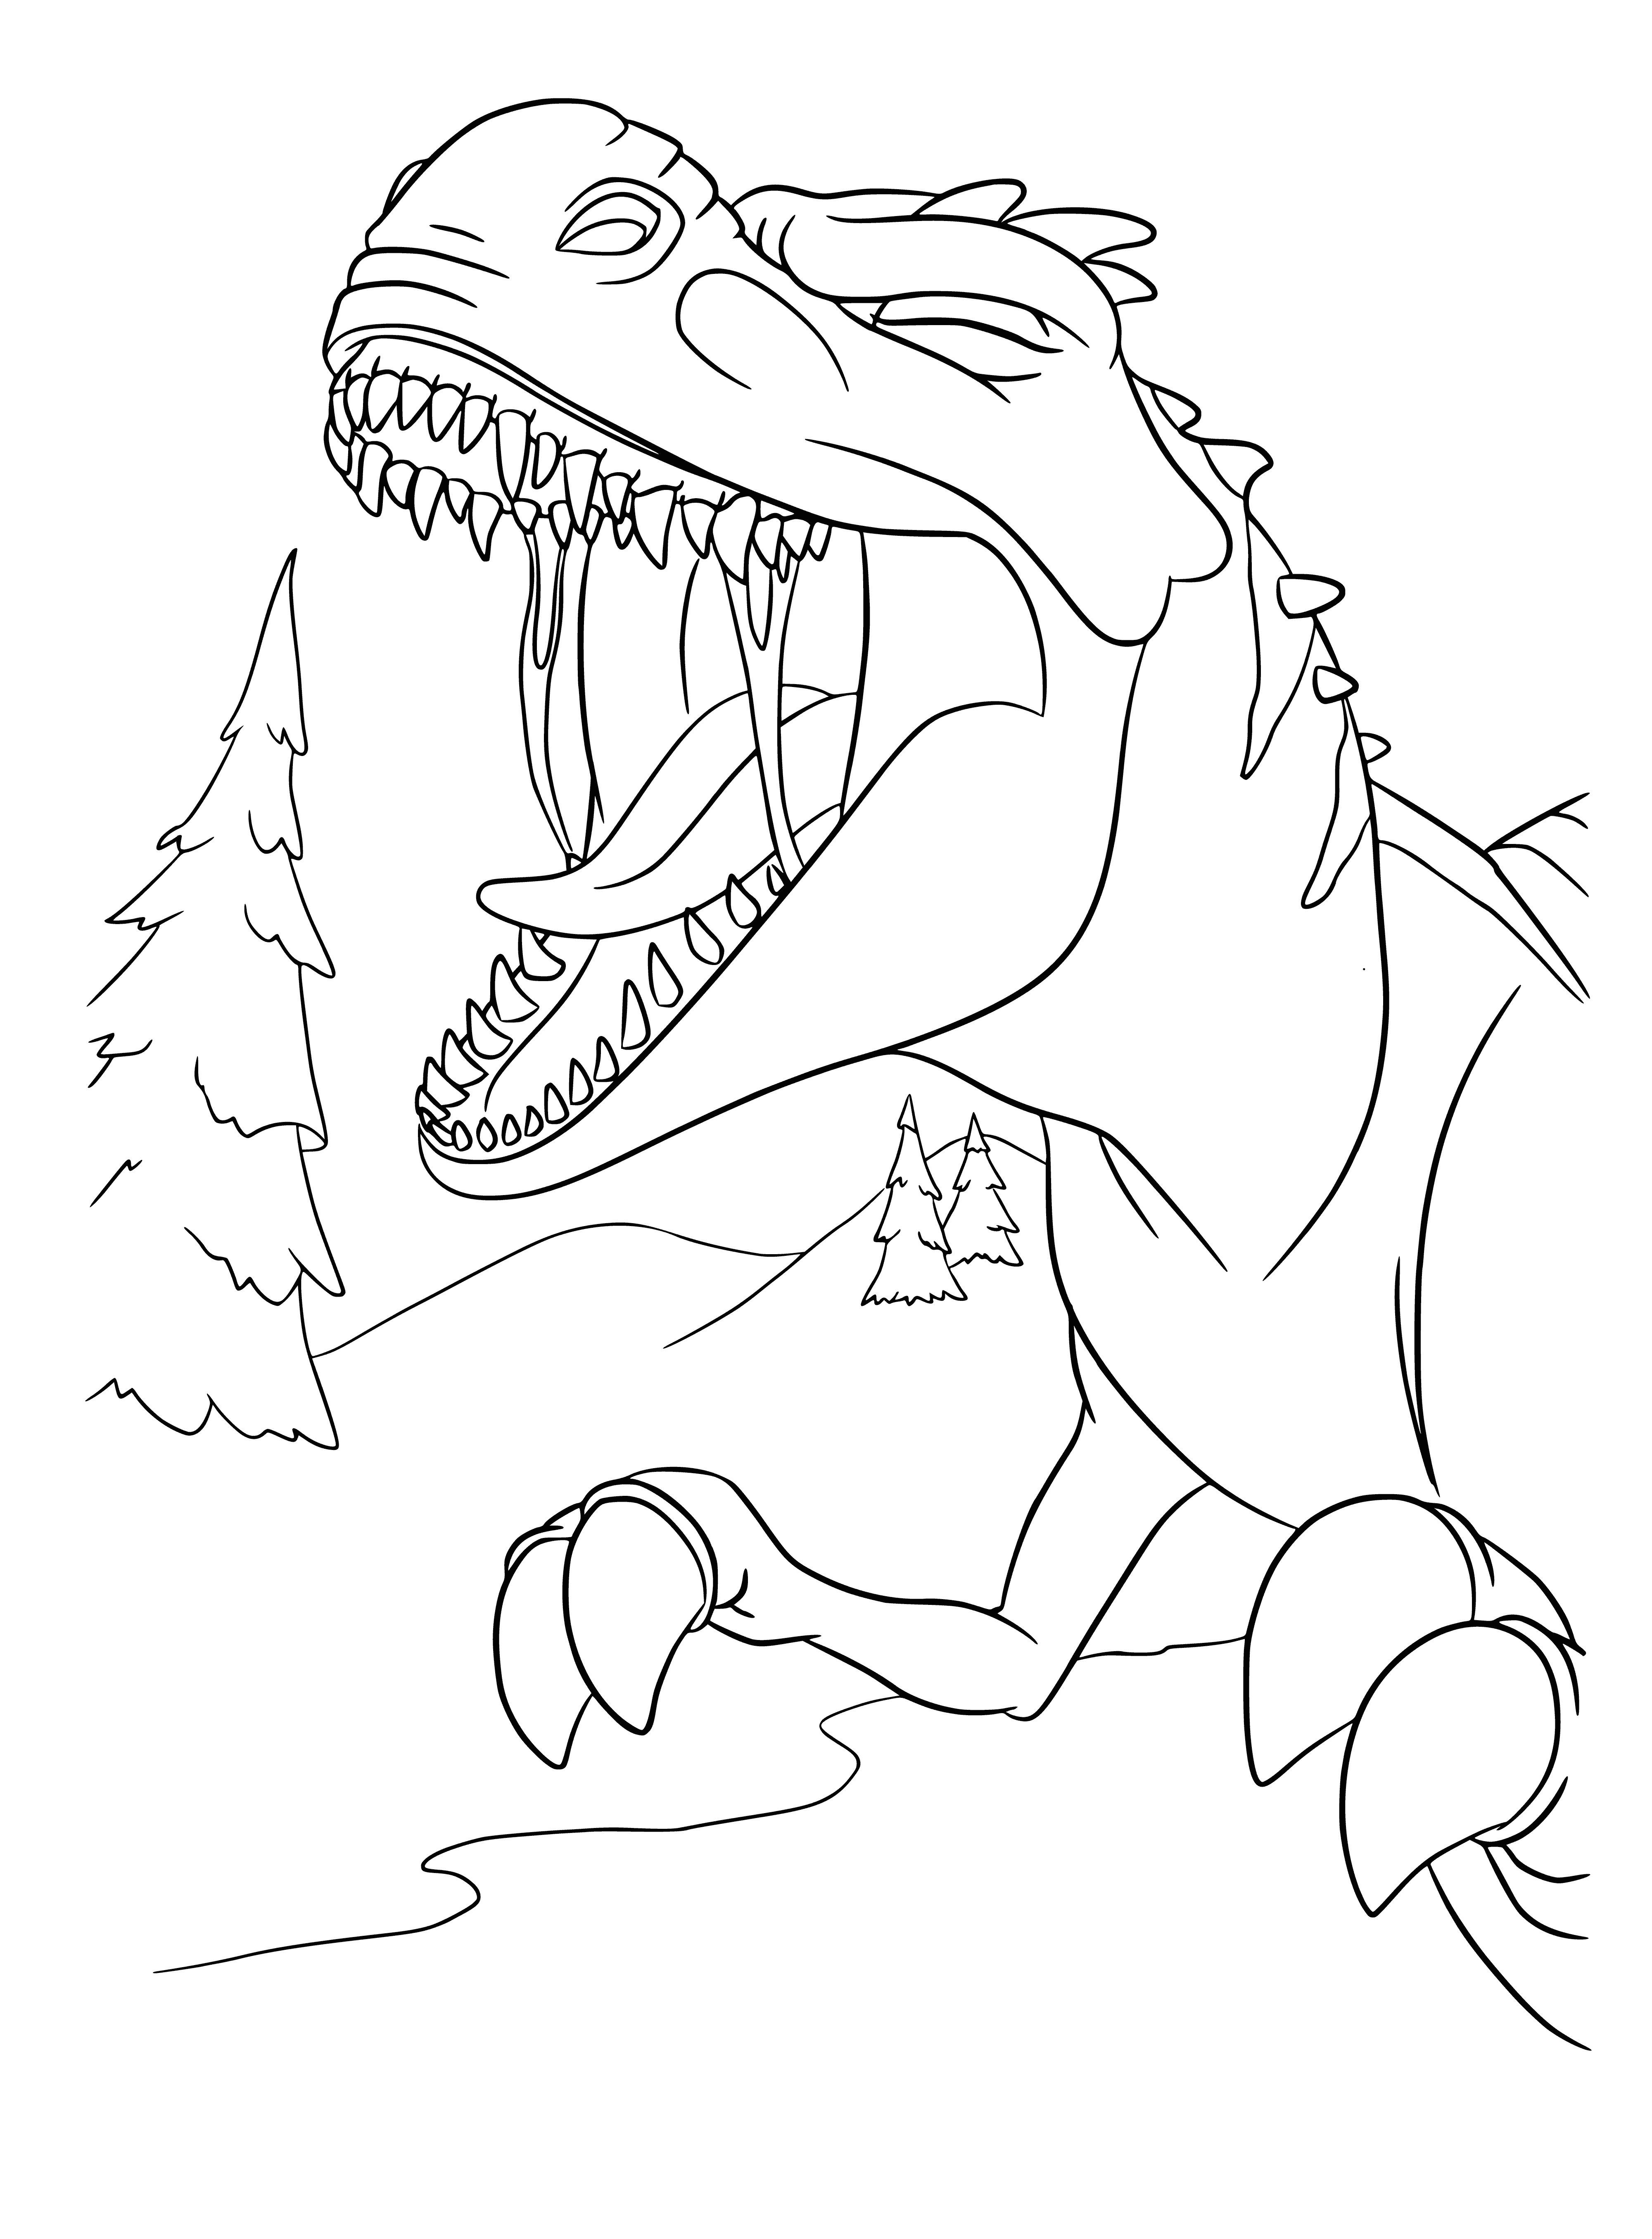 Loud roar of mother coloring page